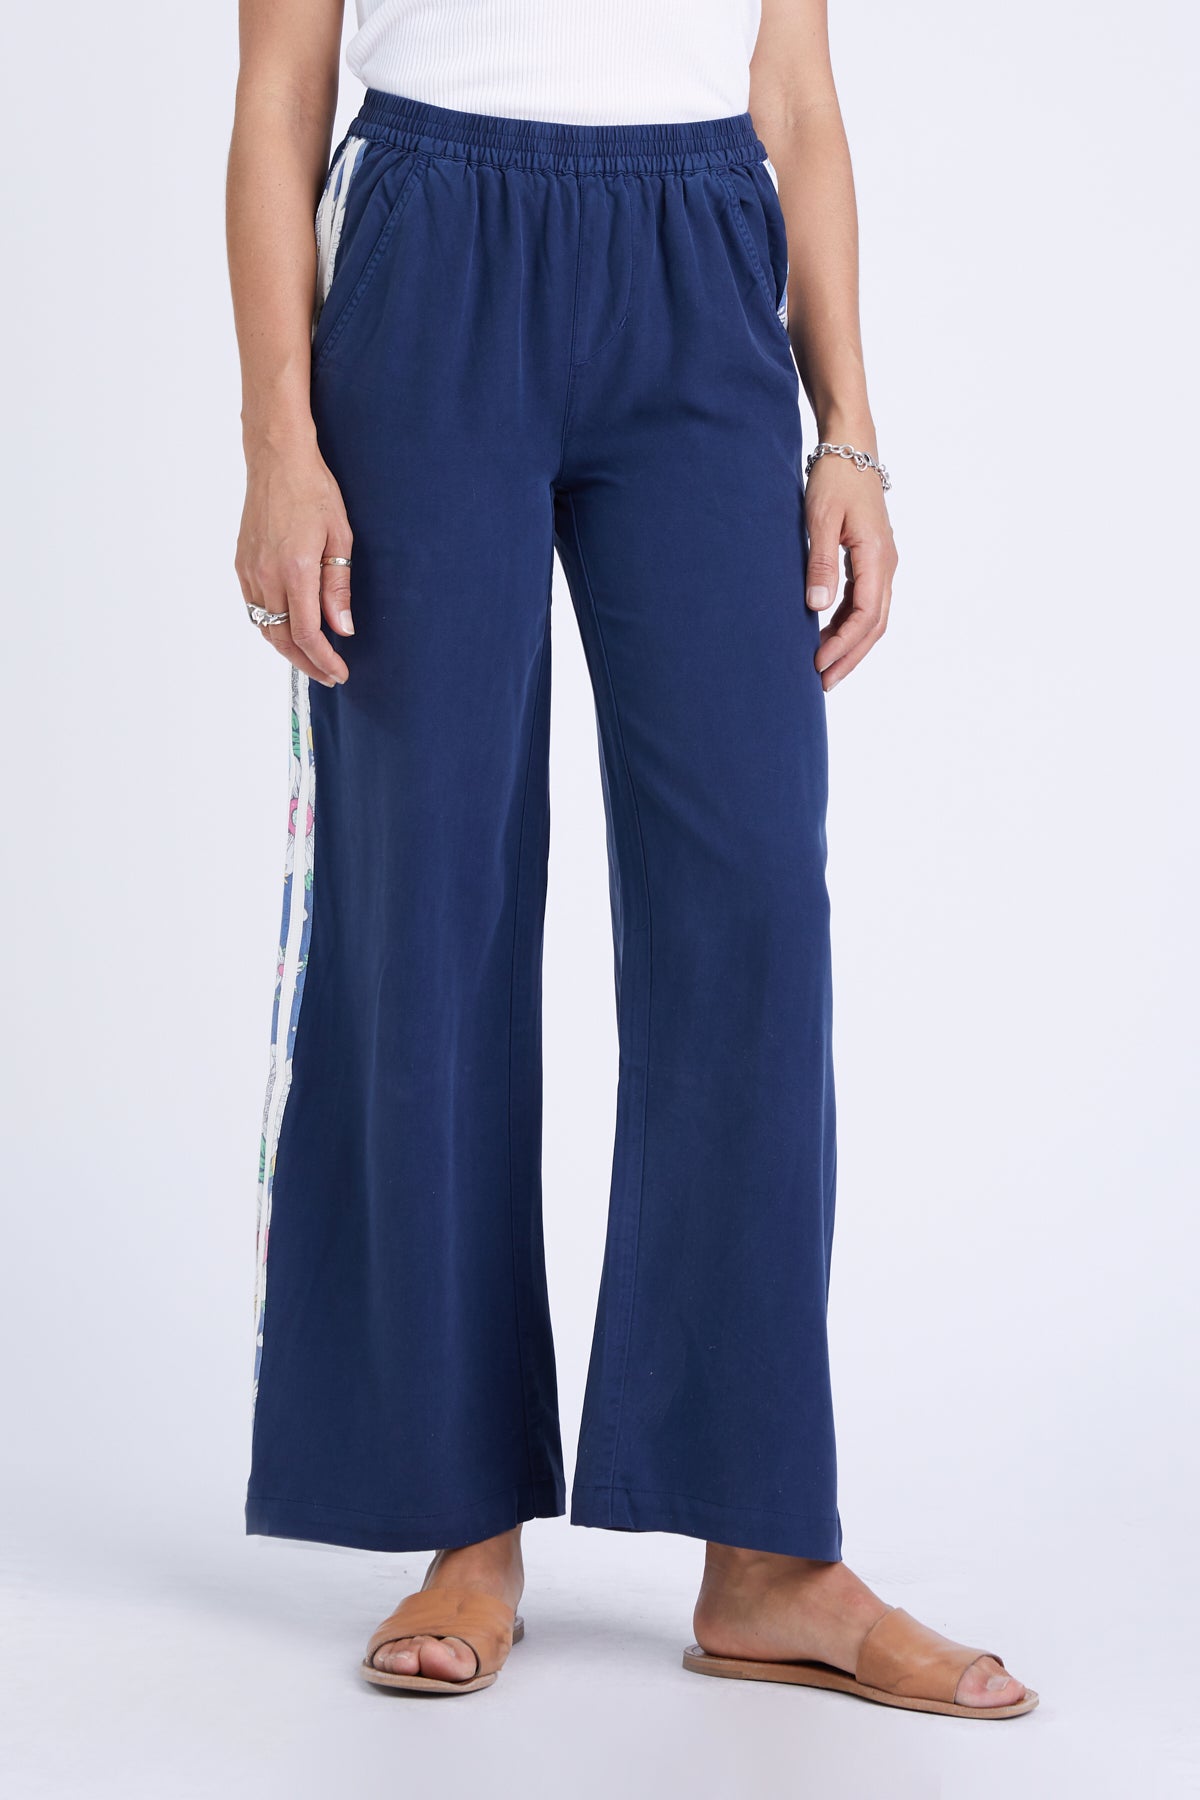 100% Silk relaxed pants with side stripes in Indigo